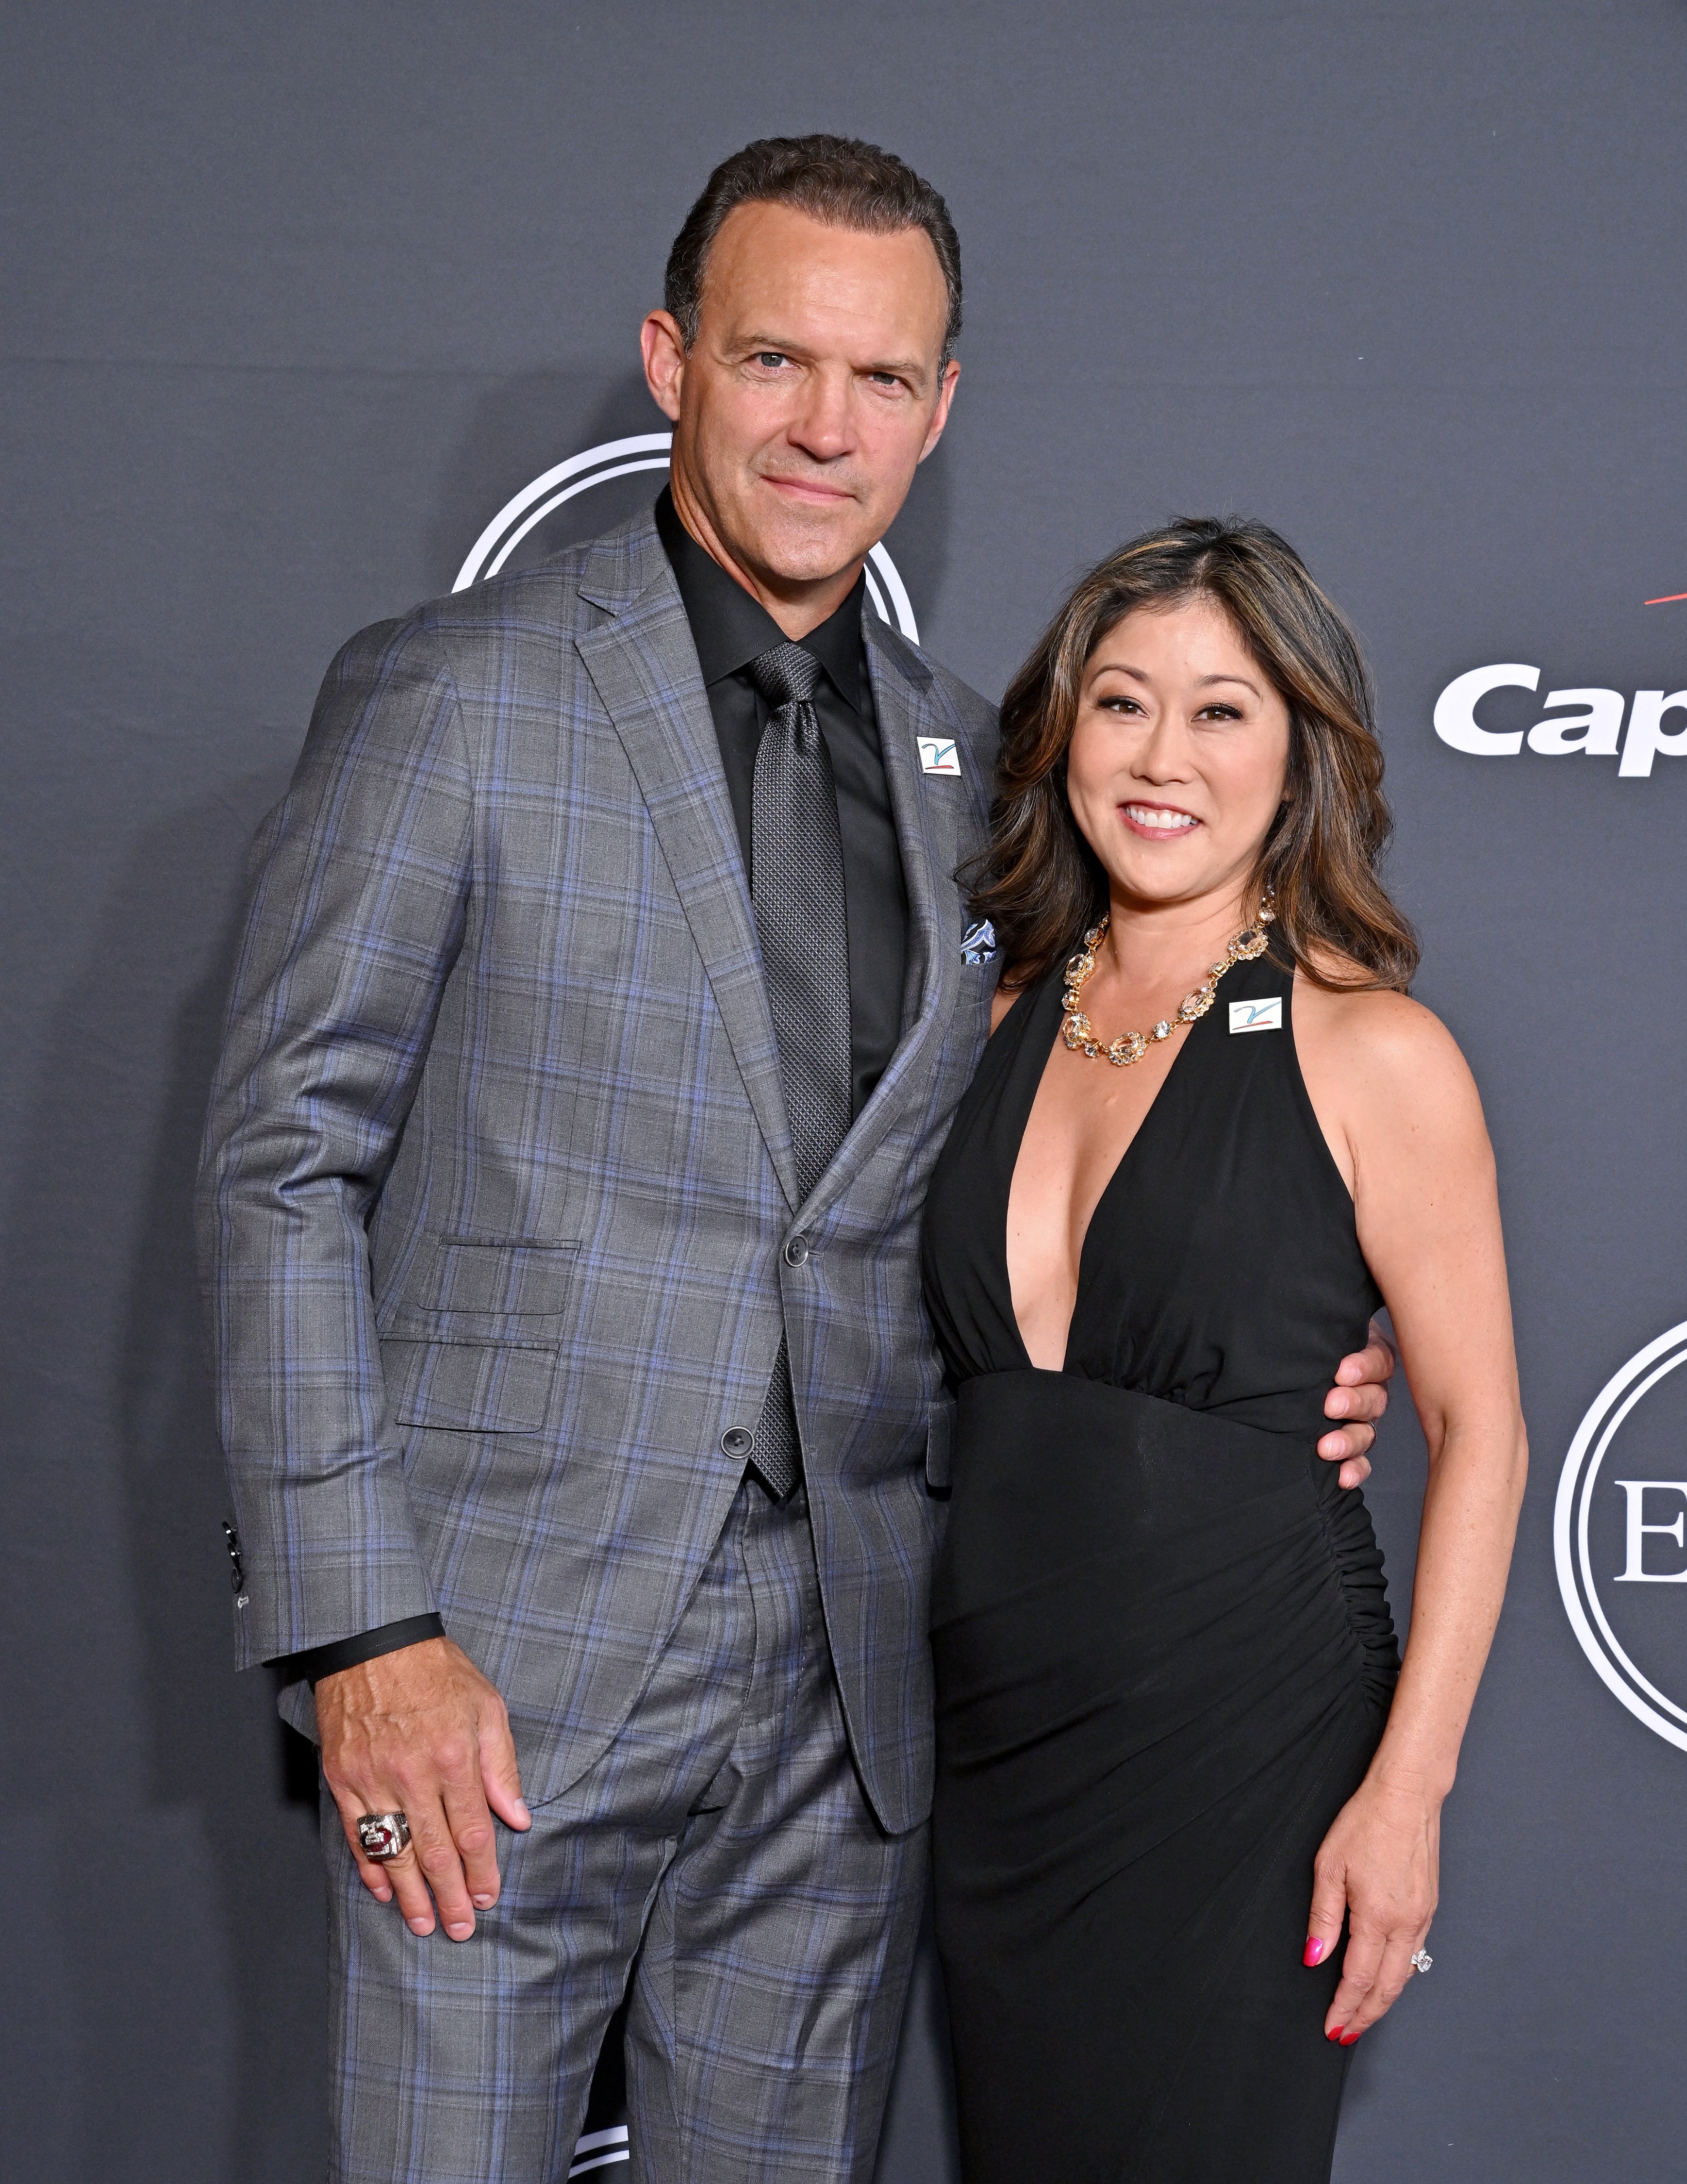  Bret Hedican and Kristi Yamaguchi pose at the 2022 ESPYs at Dolby Theatre on July 20, 2022, in Hollywood, California | Source: Getty Images